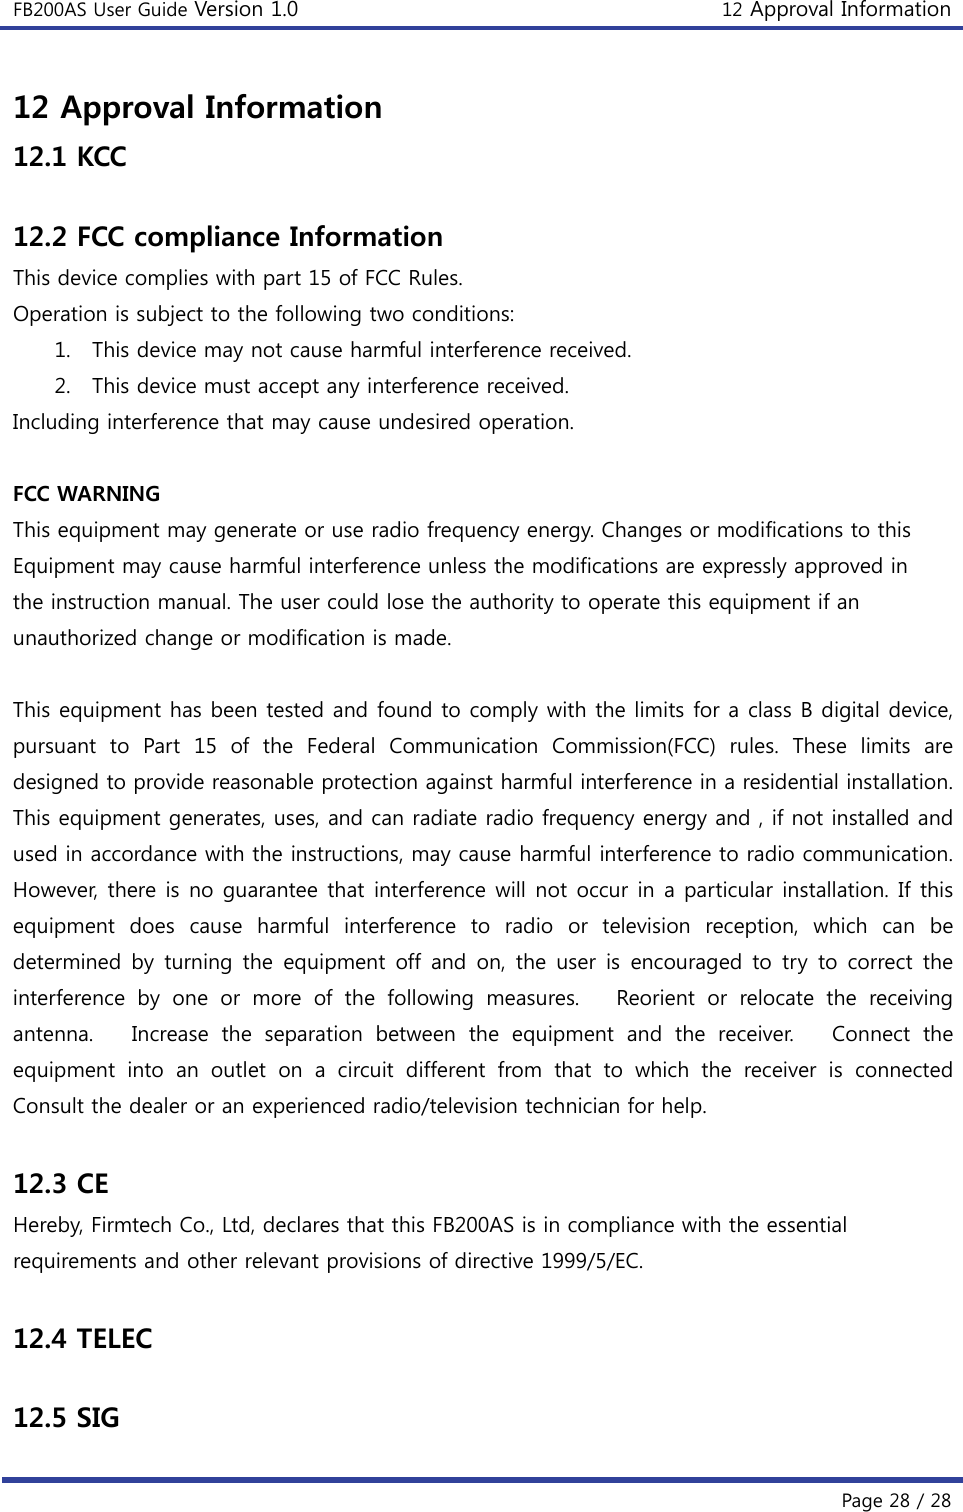 FB200AS User Guide Version 1.0 12 Approval Information  Page 28 / 28 12 Approval Information 12.1 KCC  12.2 FCC compliance Information This device complies with part 15 of FCC Rules. Operation is subject to the following two conditions: 1. This device may not cause harmful interference received. 2. This device must accept any interference received. Including interference that may cause undesired operation.  FCC WARNING This equipment may generate or use radio frequency energy. Changes or modifications to this Equipment may cause harmful interference unless the modifications are expressly approved in the instruction manual. The user could lose the authority to operate this equipment if an unauthorized change or modification is made.  This equipment has been tested and found to comply with the limits for a class B digital device, pursuant to Part 15 of the Federal Communication Commission(FCC)  rules.  These  limits  are designed to provide reasonable protection against harmful interference in a residential installation. This equipment generates, uses, and can radiate radio frequency energy and , if not installed and used in accordance with the instructions, may cause harmful interference to radio communication. However, there is no guarantee that interference will not occur in a particular installation. If this equipment  does  cause  harmful  interference  to  radio  or  television reception, which can be determined  by  turning  the  equipment  off and  on, the  user  is  encouraged to  try  to  correct the interference by one or more of the following measures.   Reorient or relocate the receiving antenna.   Increase the separation between the equipment and the  receiver.      Connect  the equipment  into  an  outlet  on  a  circuit  different  from  that  to  which  the  receiver  is  connected     Consult the dealer or an experienced radio/television technician for help.  12.3 CE Hereby, Firmtech Co., Ltd, declares that this FB200AS is in compliance with the essential   requirements and other relevant provisions of directive 1999/5/EC.  12.4 TELEC  12.5 SIG 